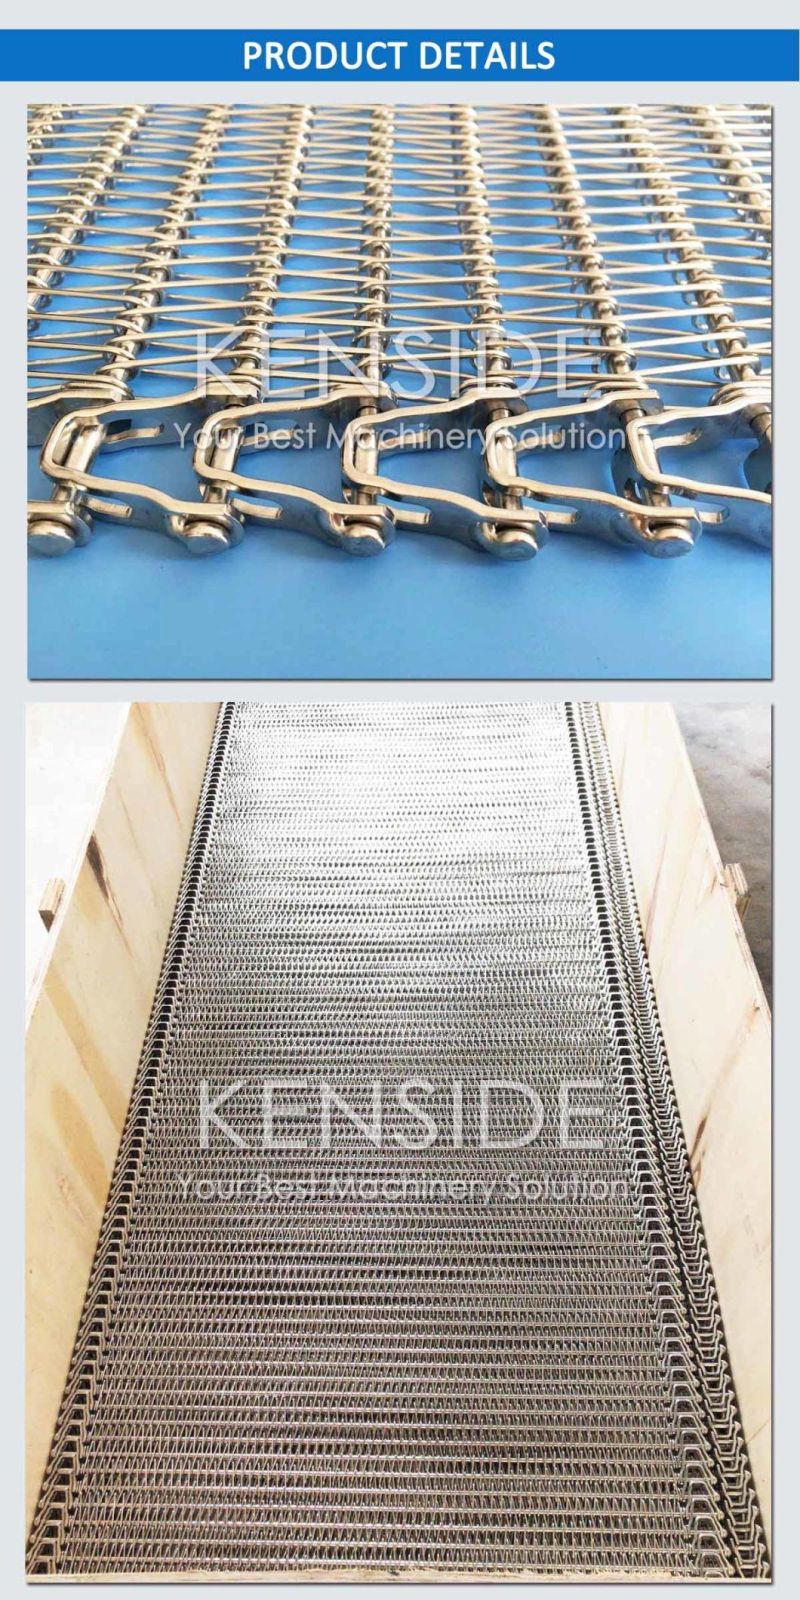 Stainless Steel Belting Spiral Conveyor Belts Reduced Radius Belts for Industrial Product Processing, Transfer and Packaging